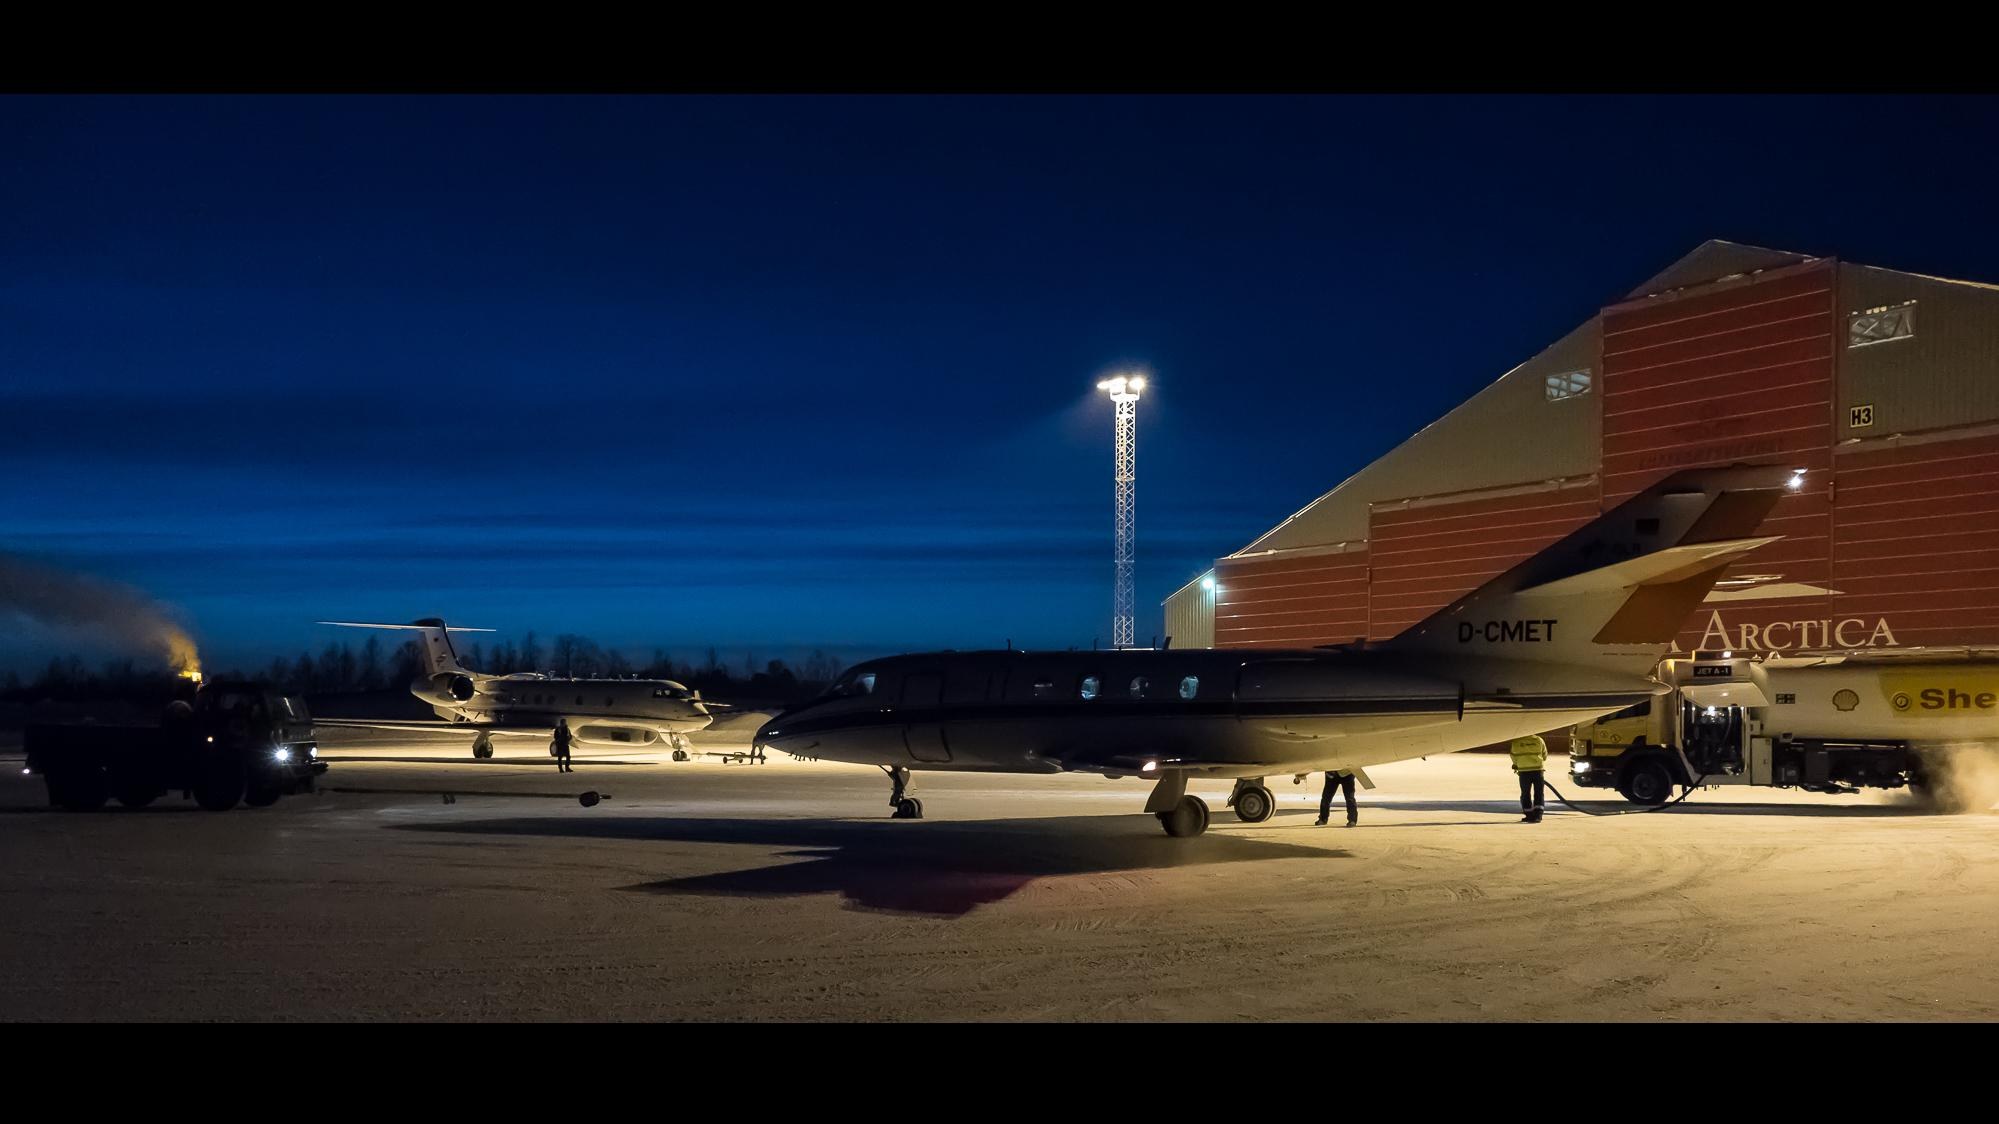 The HALO and Falcon research aircraft in front of the hangar in Kiruna